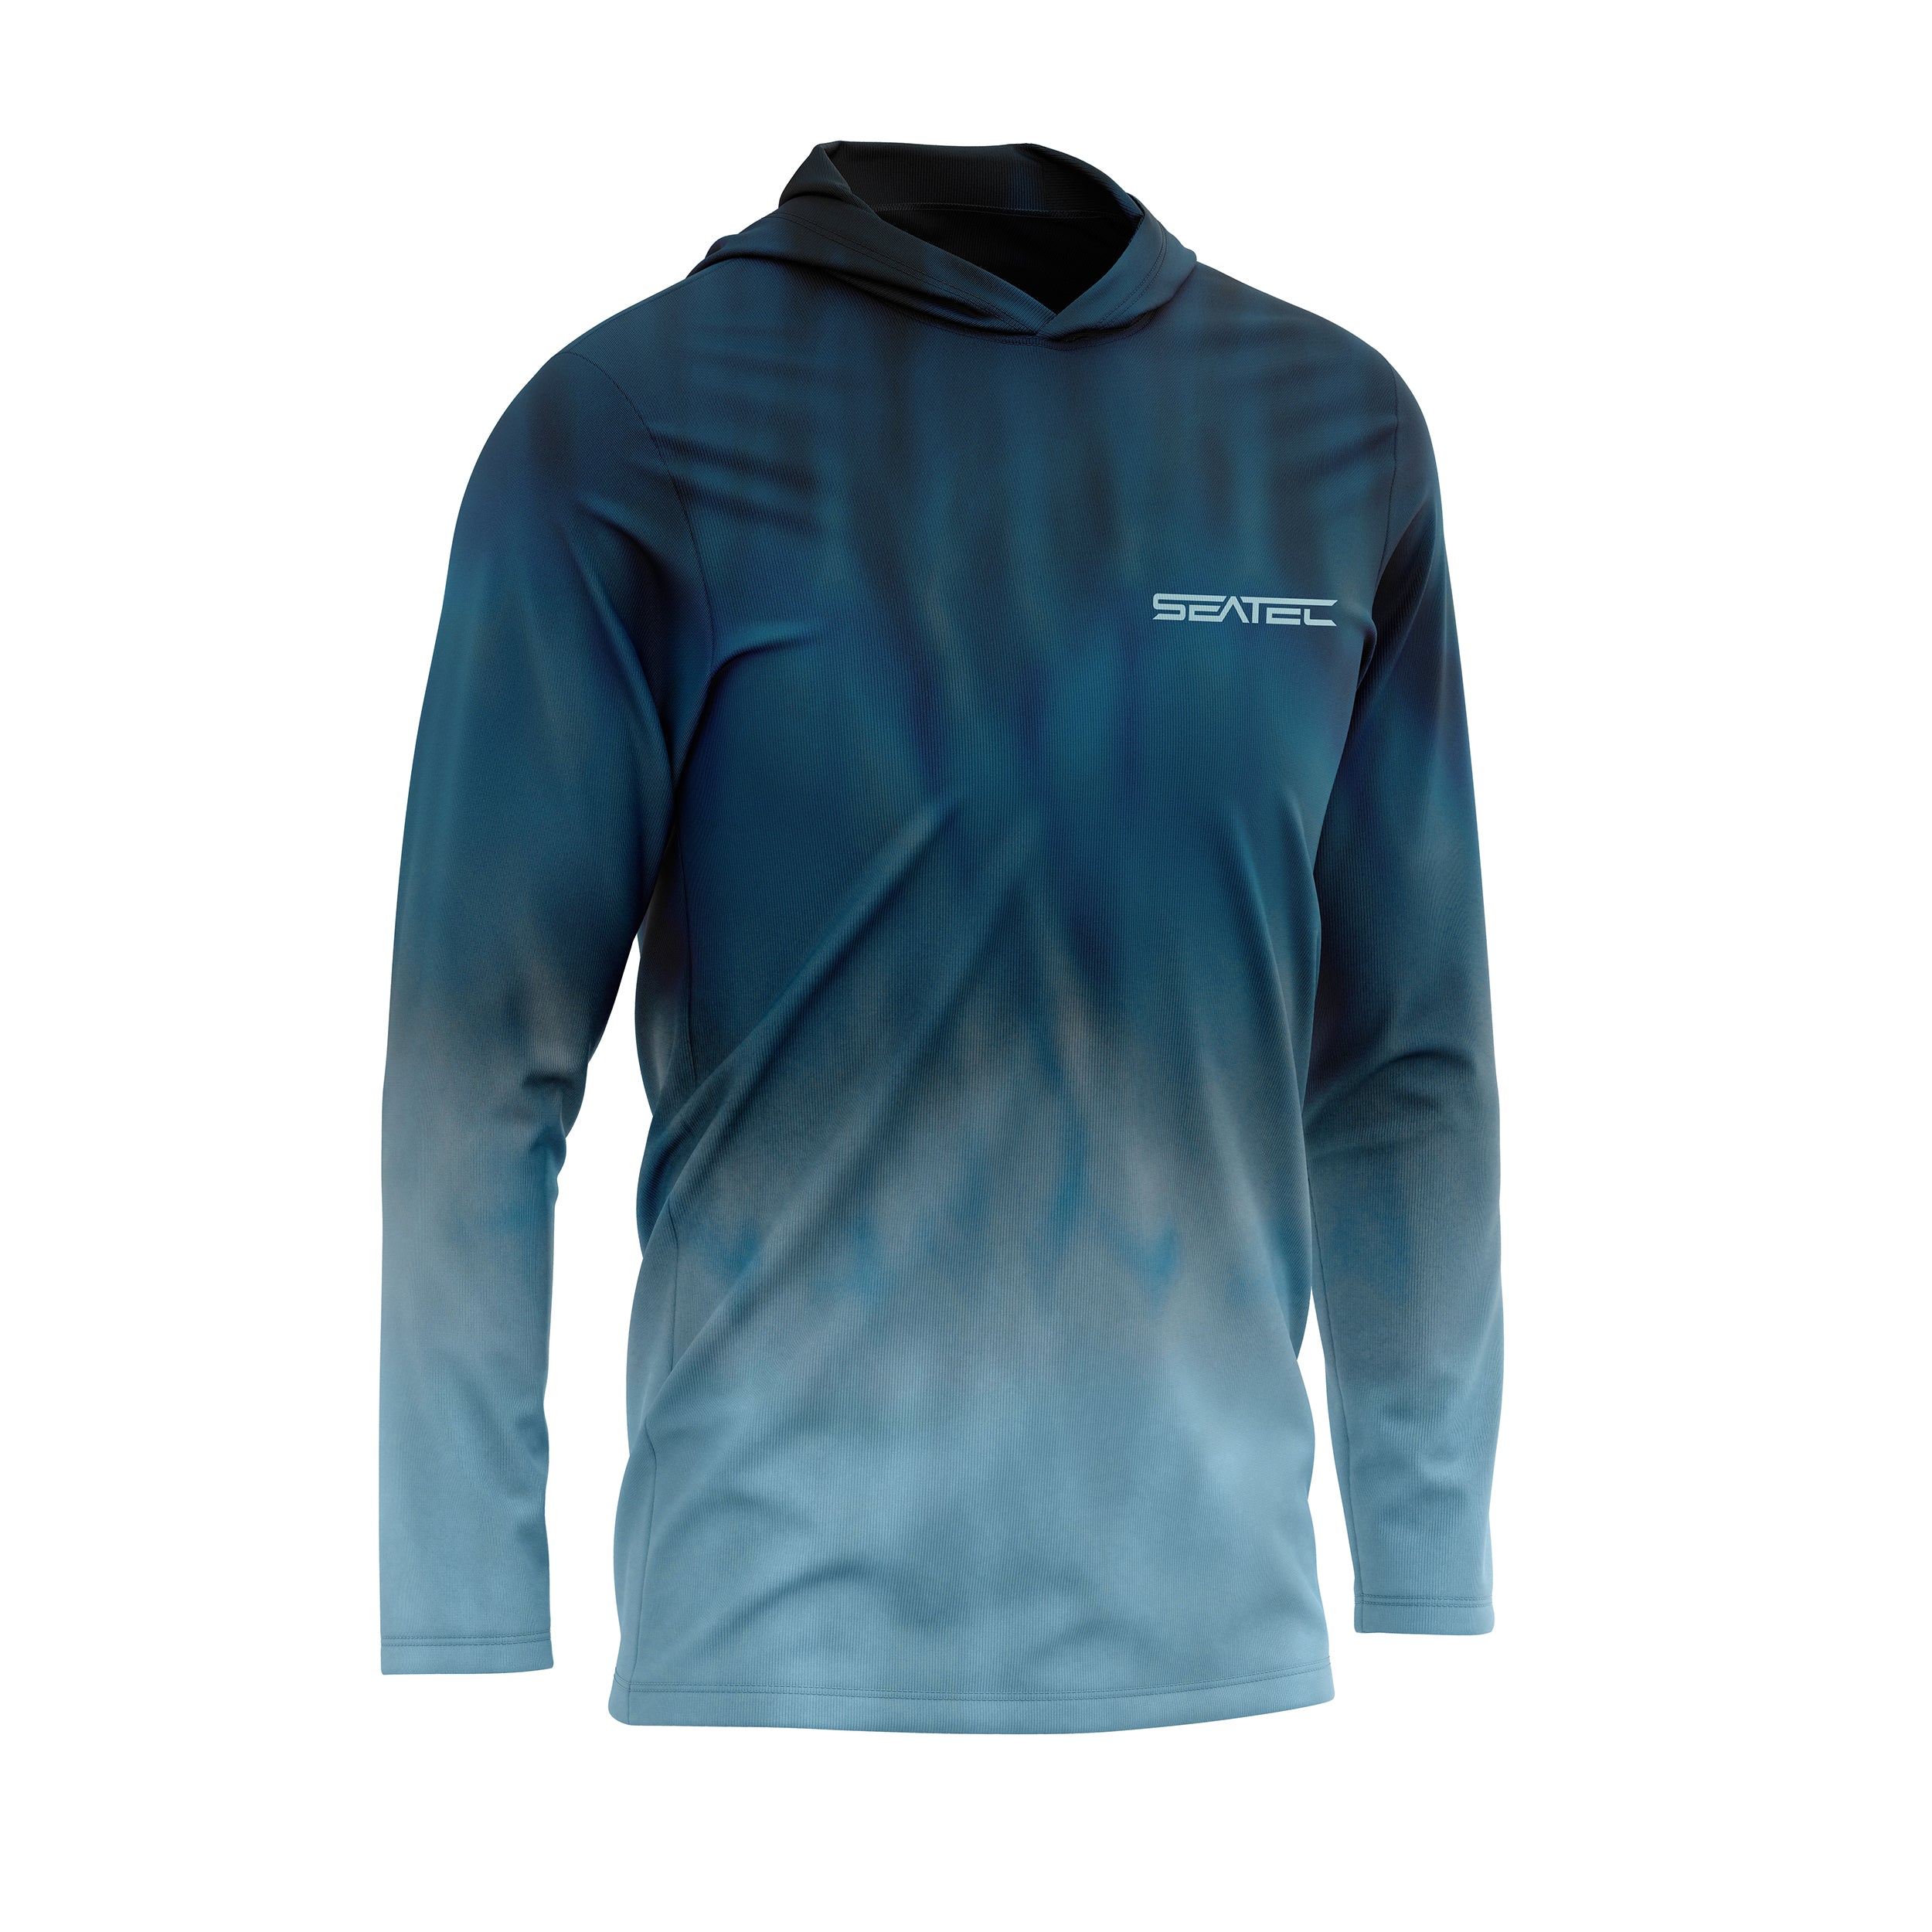 Seatec Outfitters Wahoo Hooded Sport Tec Performance Shirt, Long Sleeve -  UPF 50+, Snag Resistant, Moisture Wicking